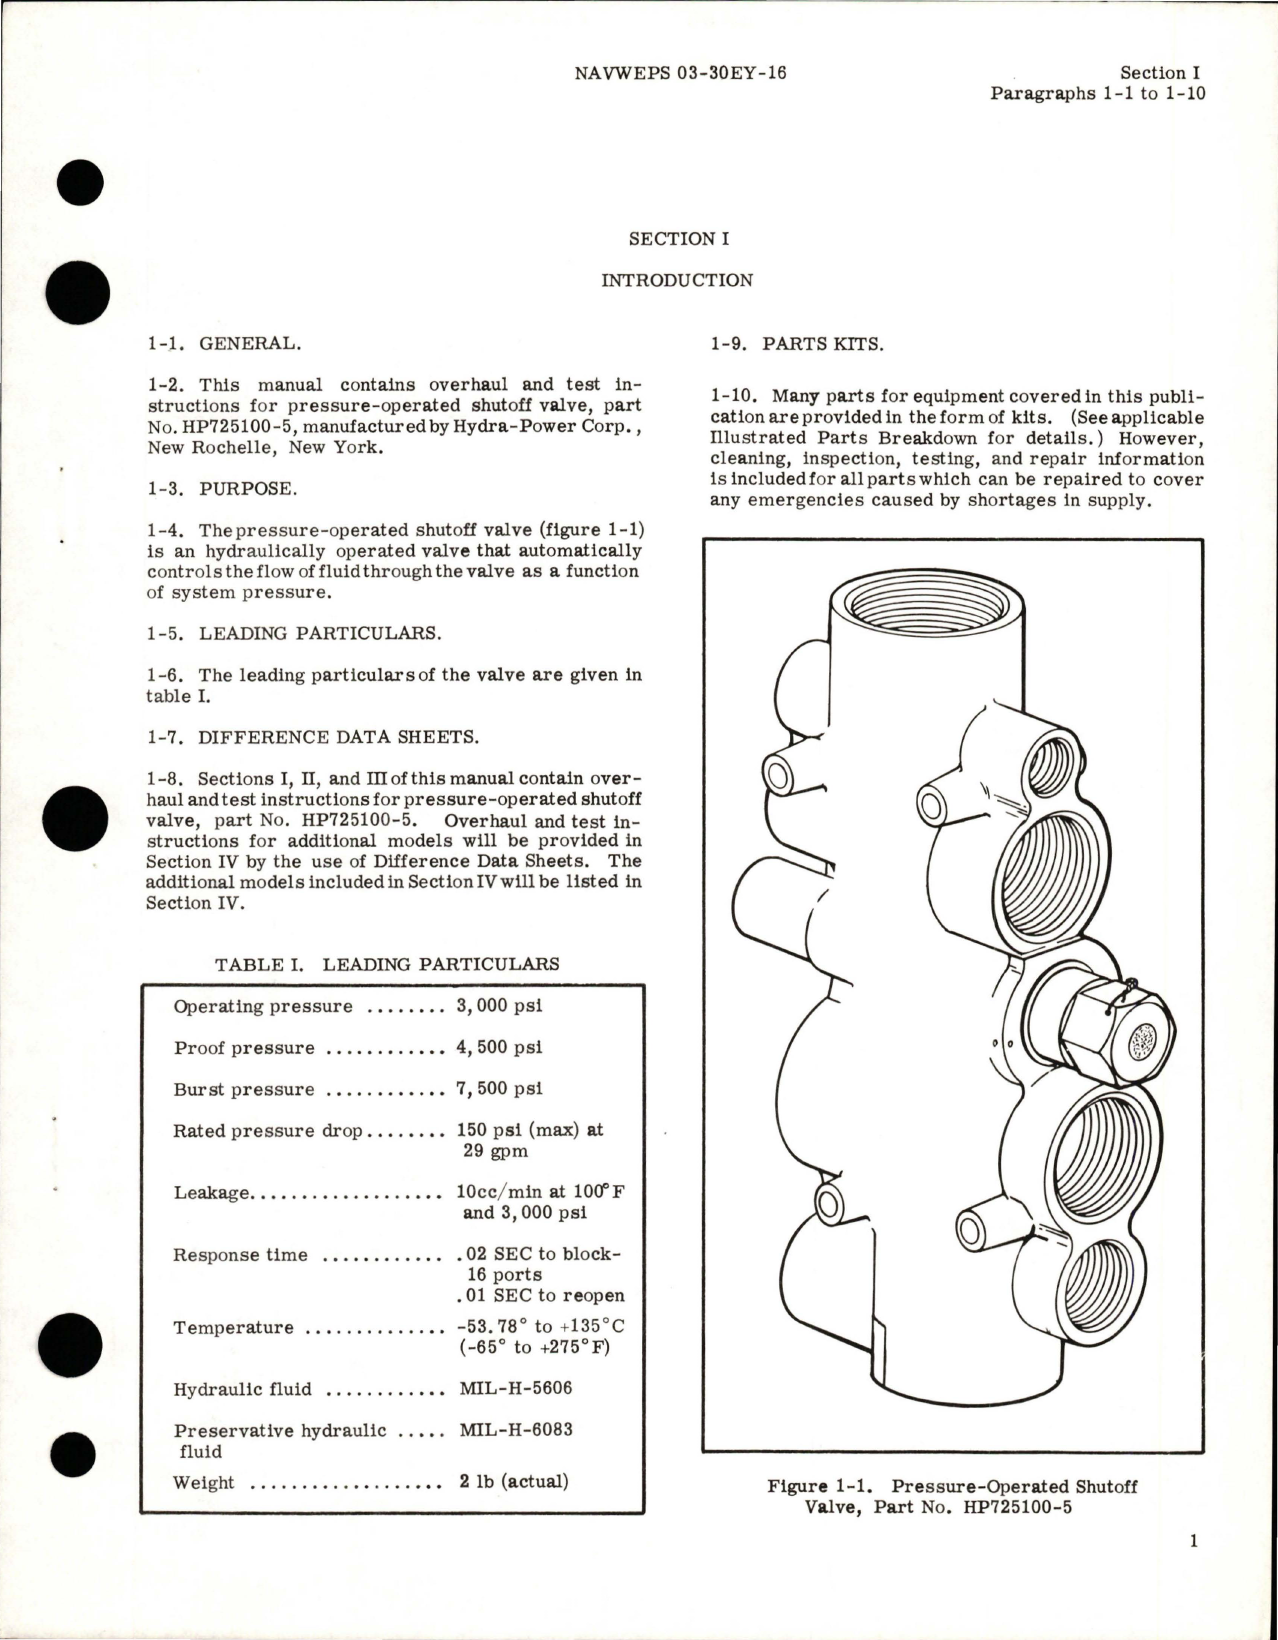 Sample page 5 from AirCorps Library document: Overhaul Instructions for Pressure Operated Shutoff Valve - Part HP725100-5